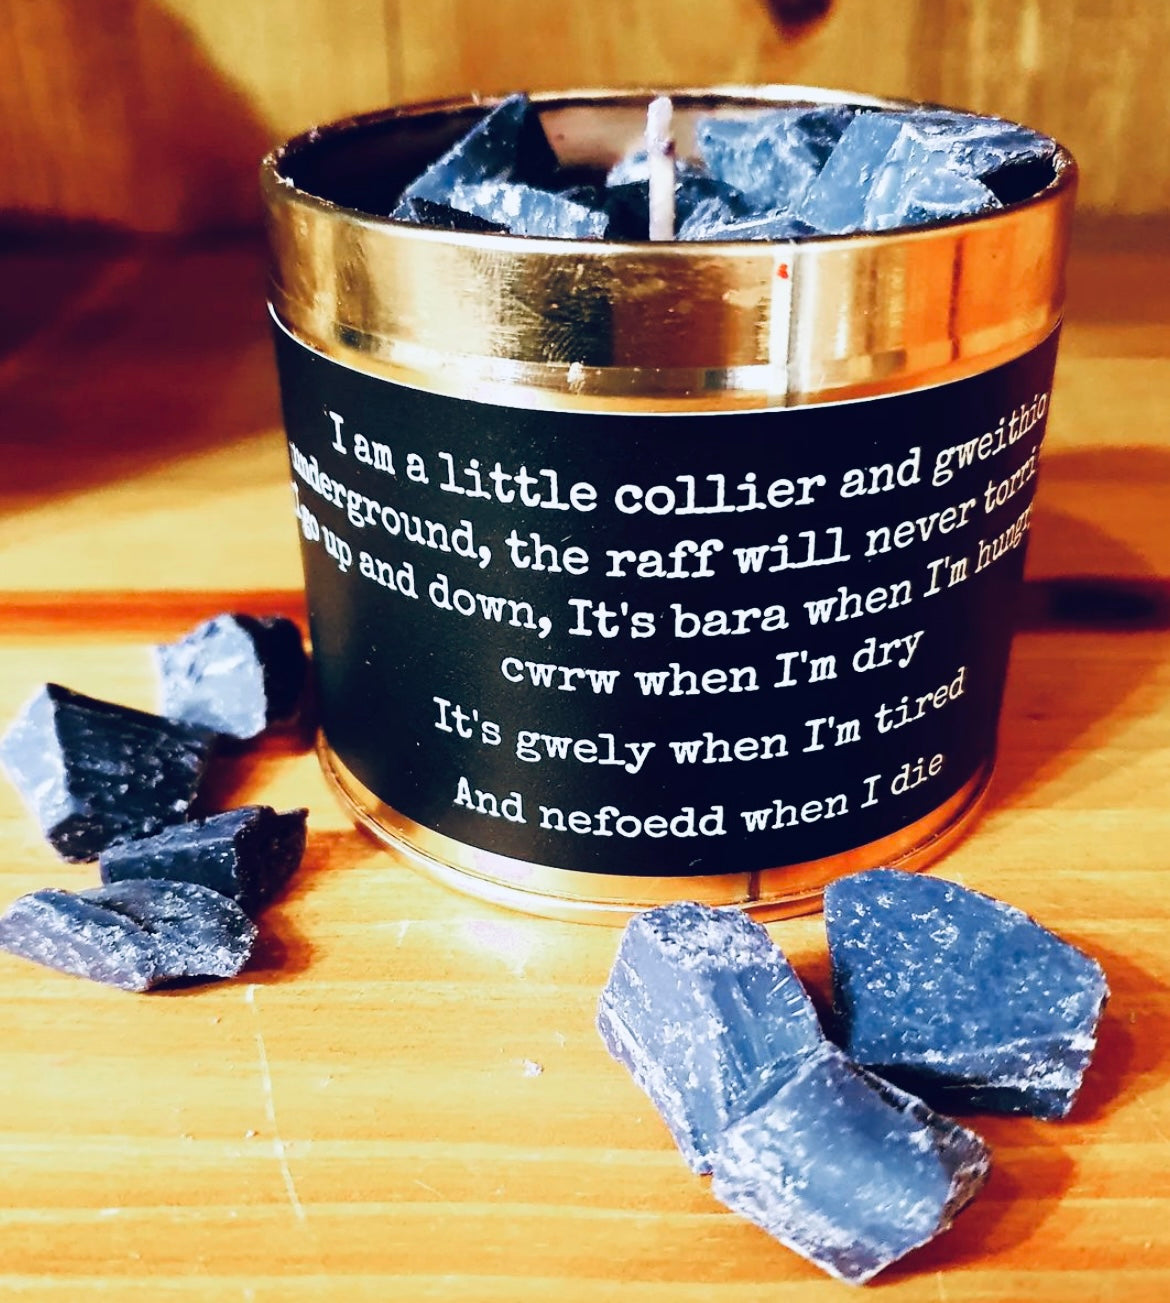 Coal scented soy candle